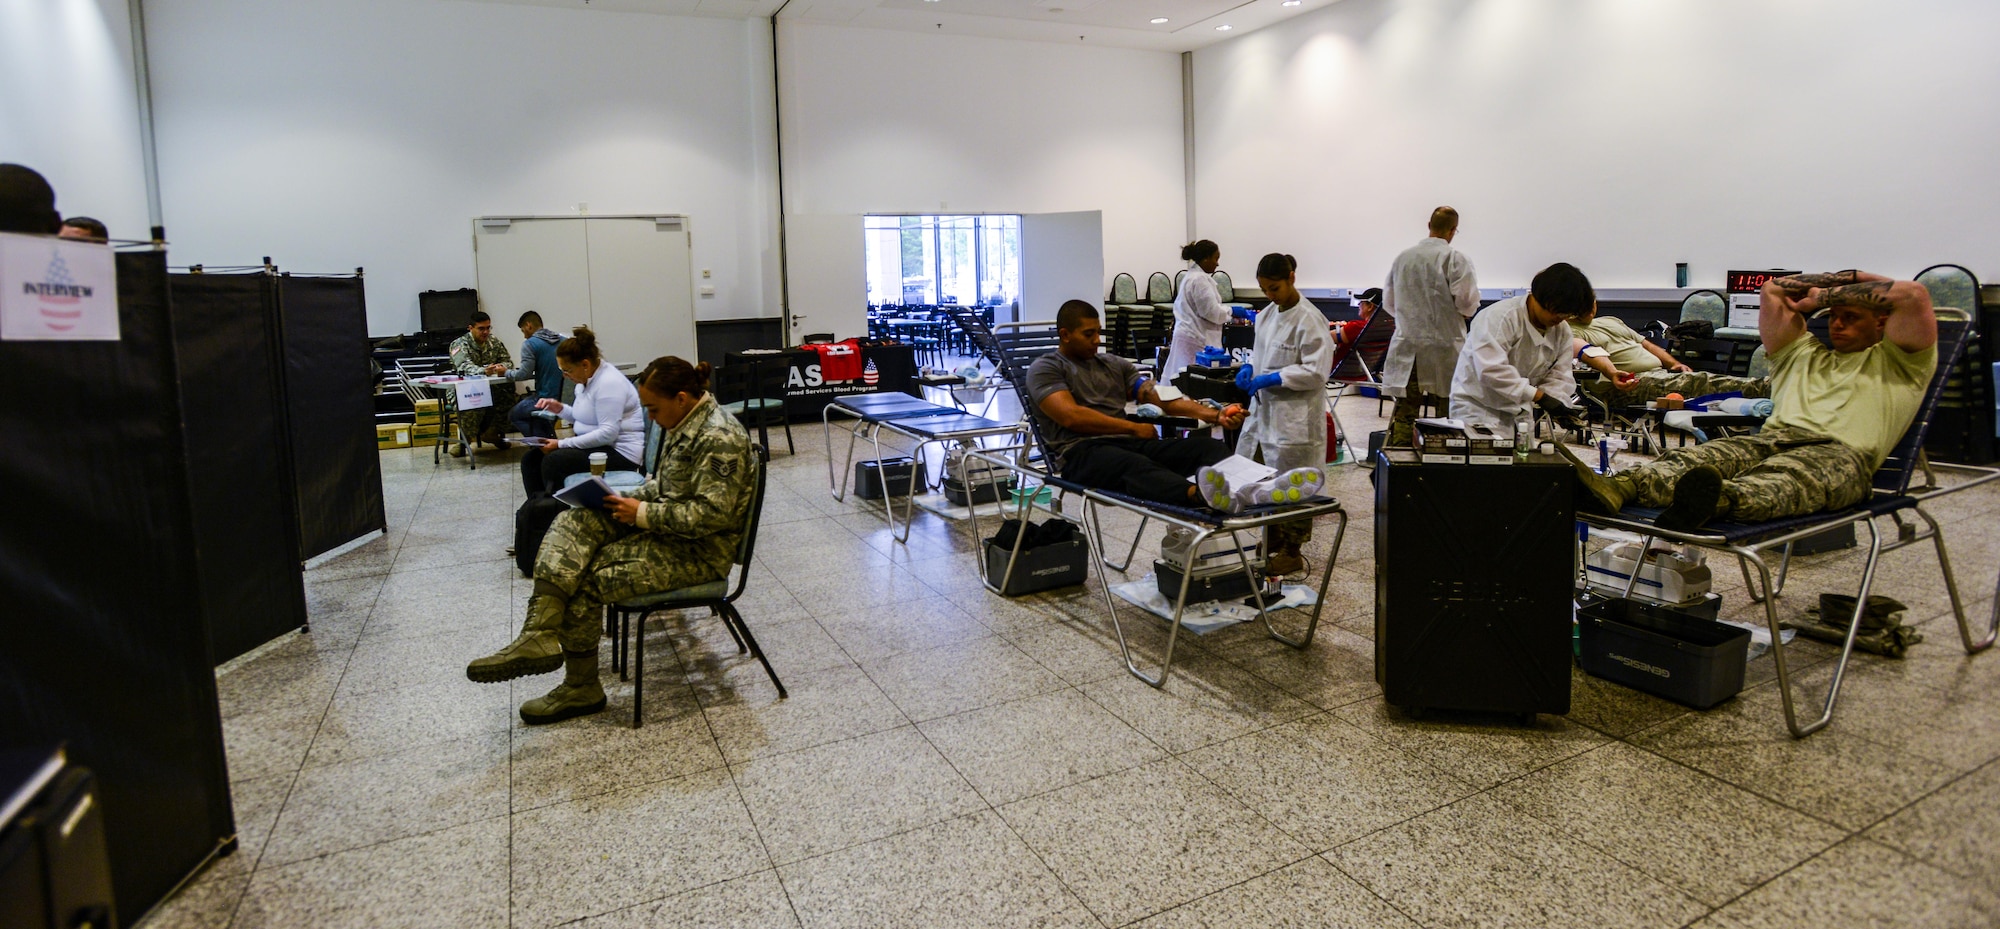 U.S. service members and civilians donate blood during a blood drive at the Kaiserslautern Military Community Center, Sept. 20, 2016. The Armed Services Blood Program-Europe hosted the blood drive to collect donations meant to go directly to service members and their families. (U.S. Air Force photo by Staff Sgt. Timothy Moore)